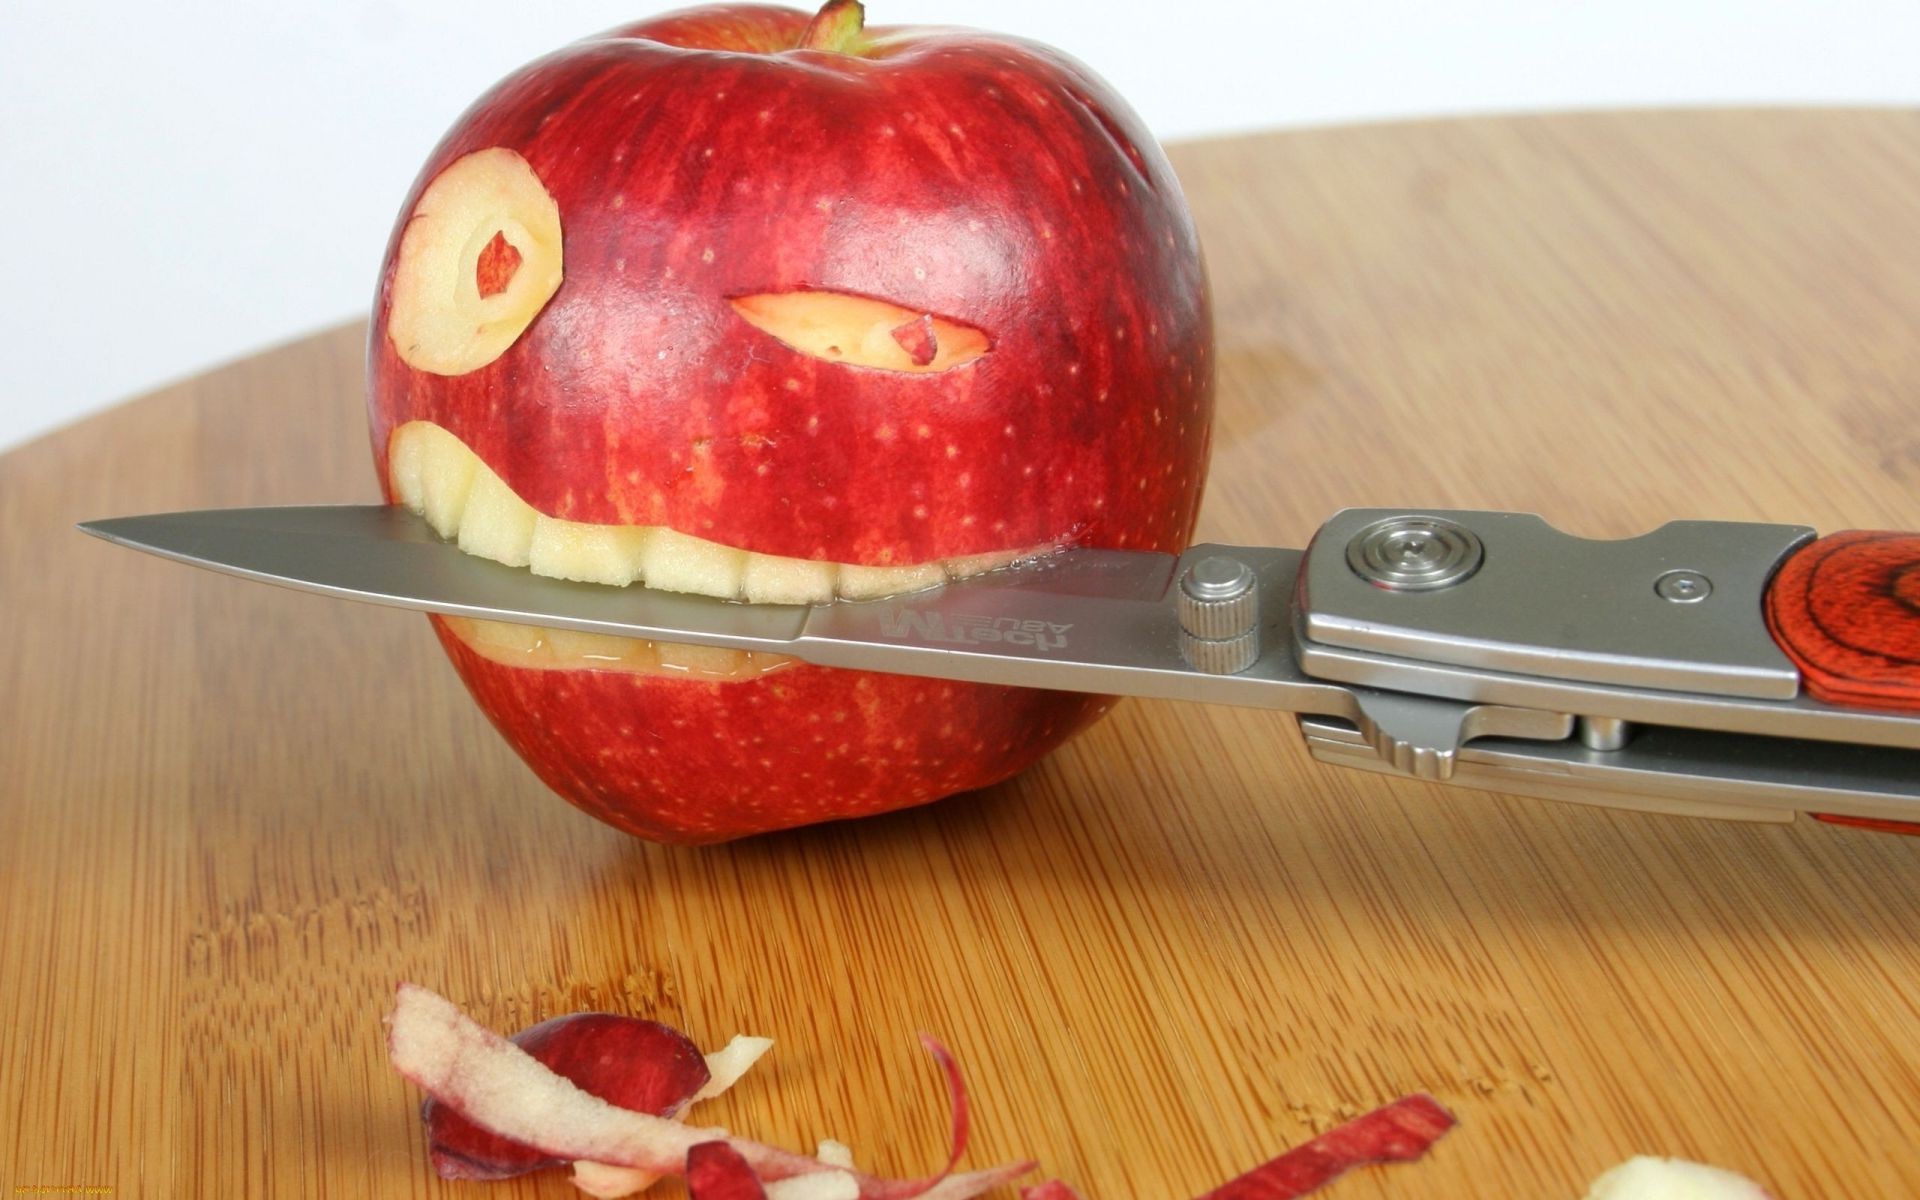 humor and satire food wood knife health fruit nutrition delicious table wooden apple